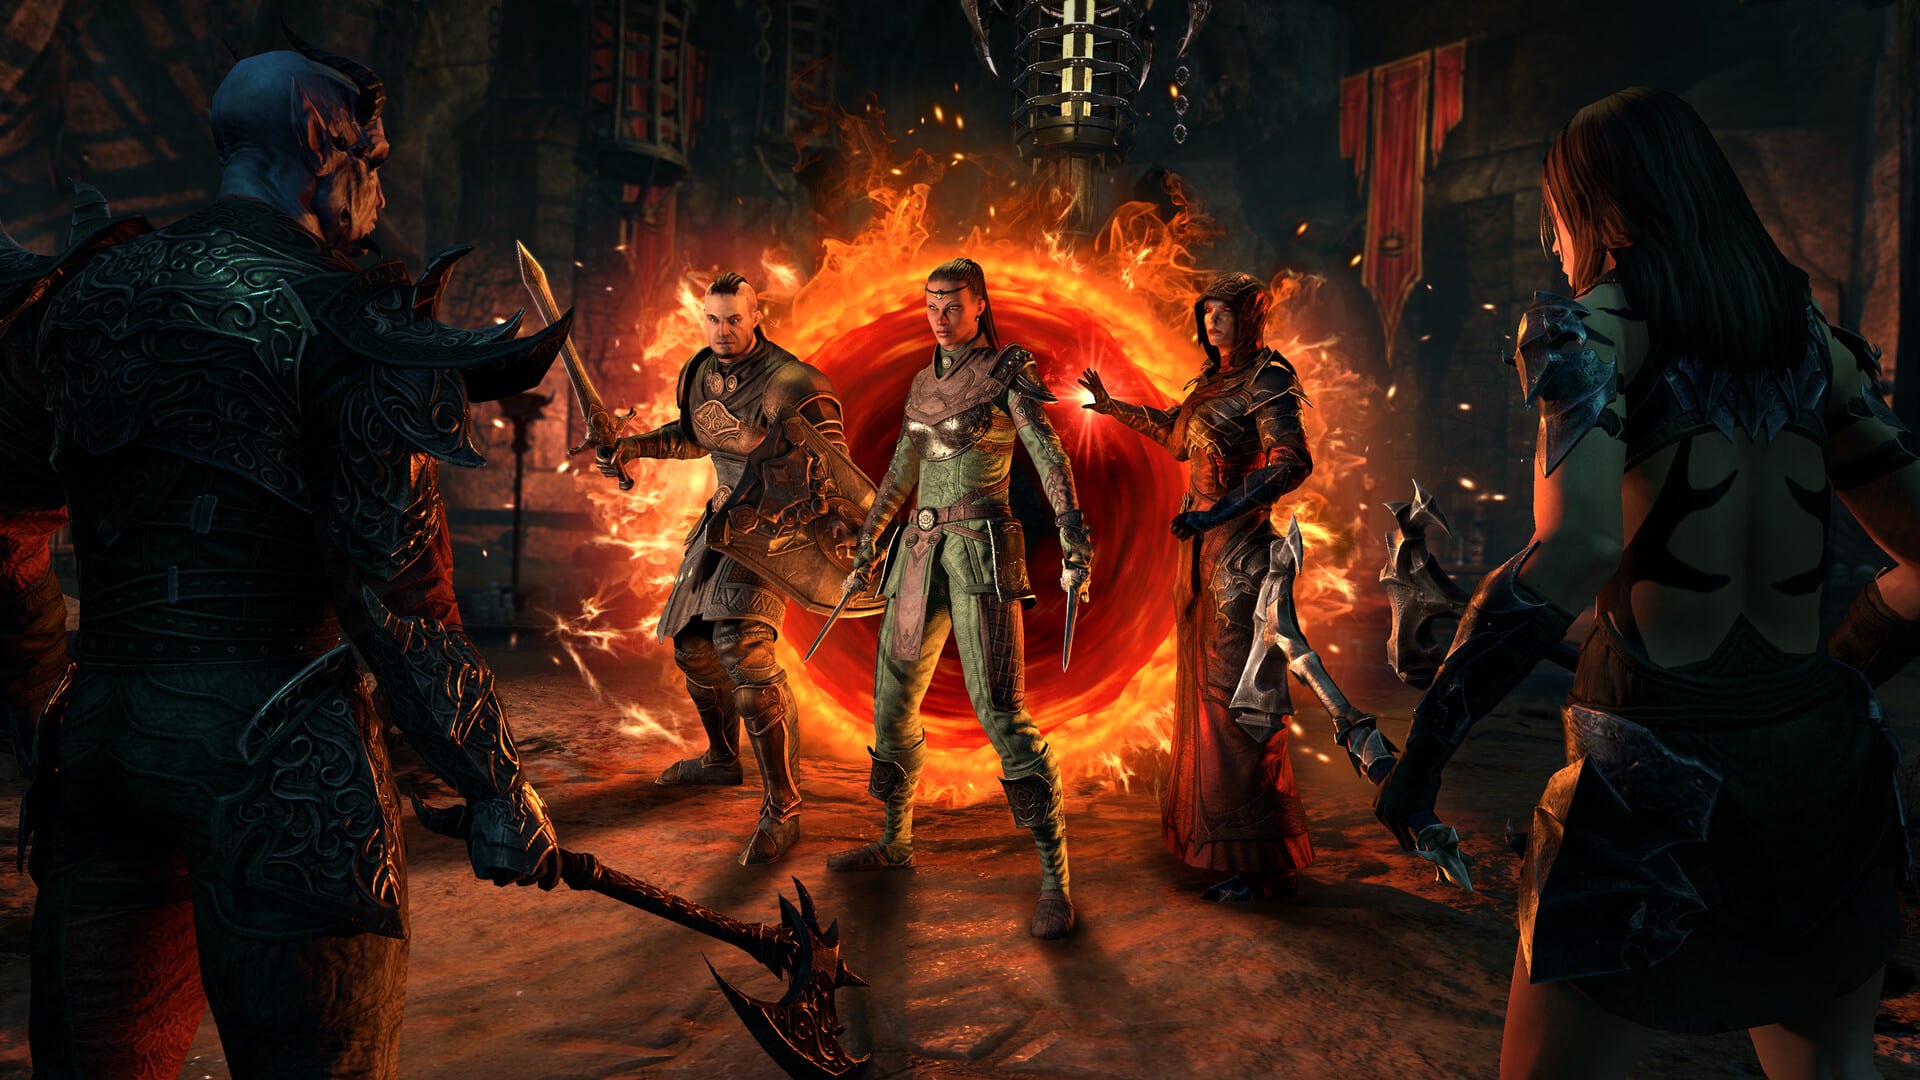 Group of ESO characters